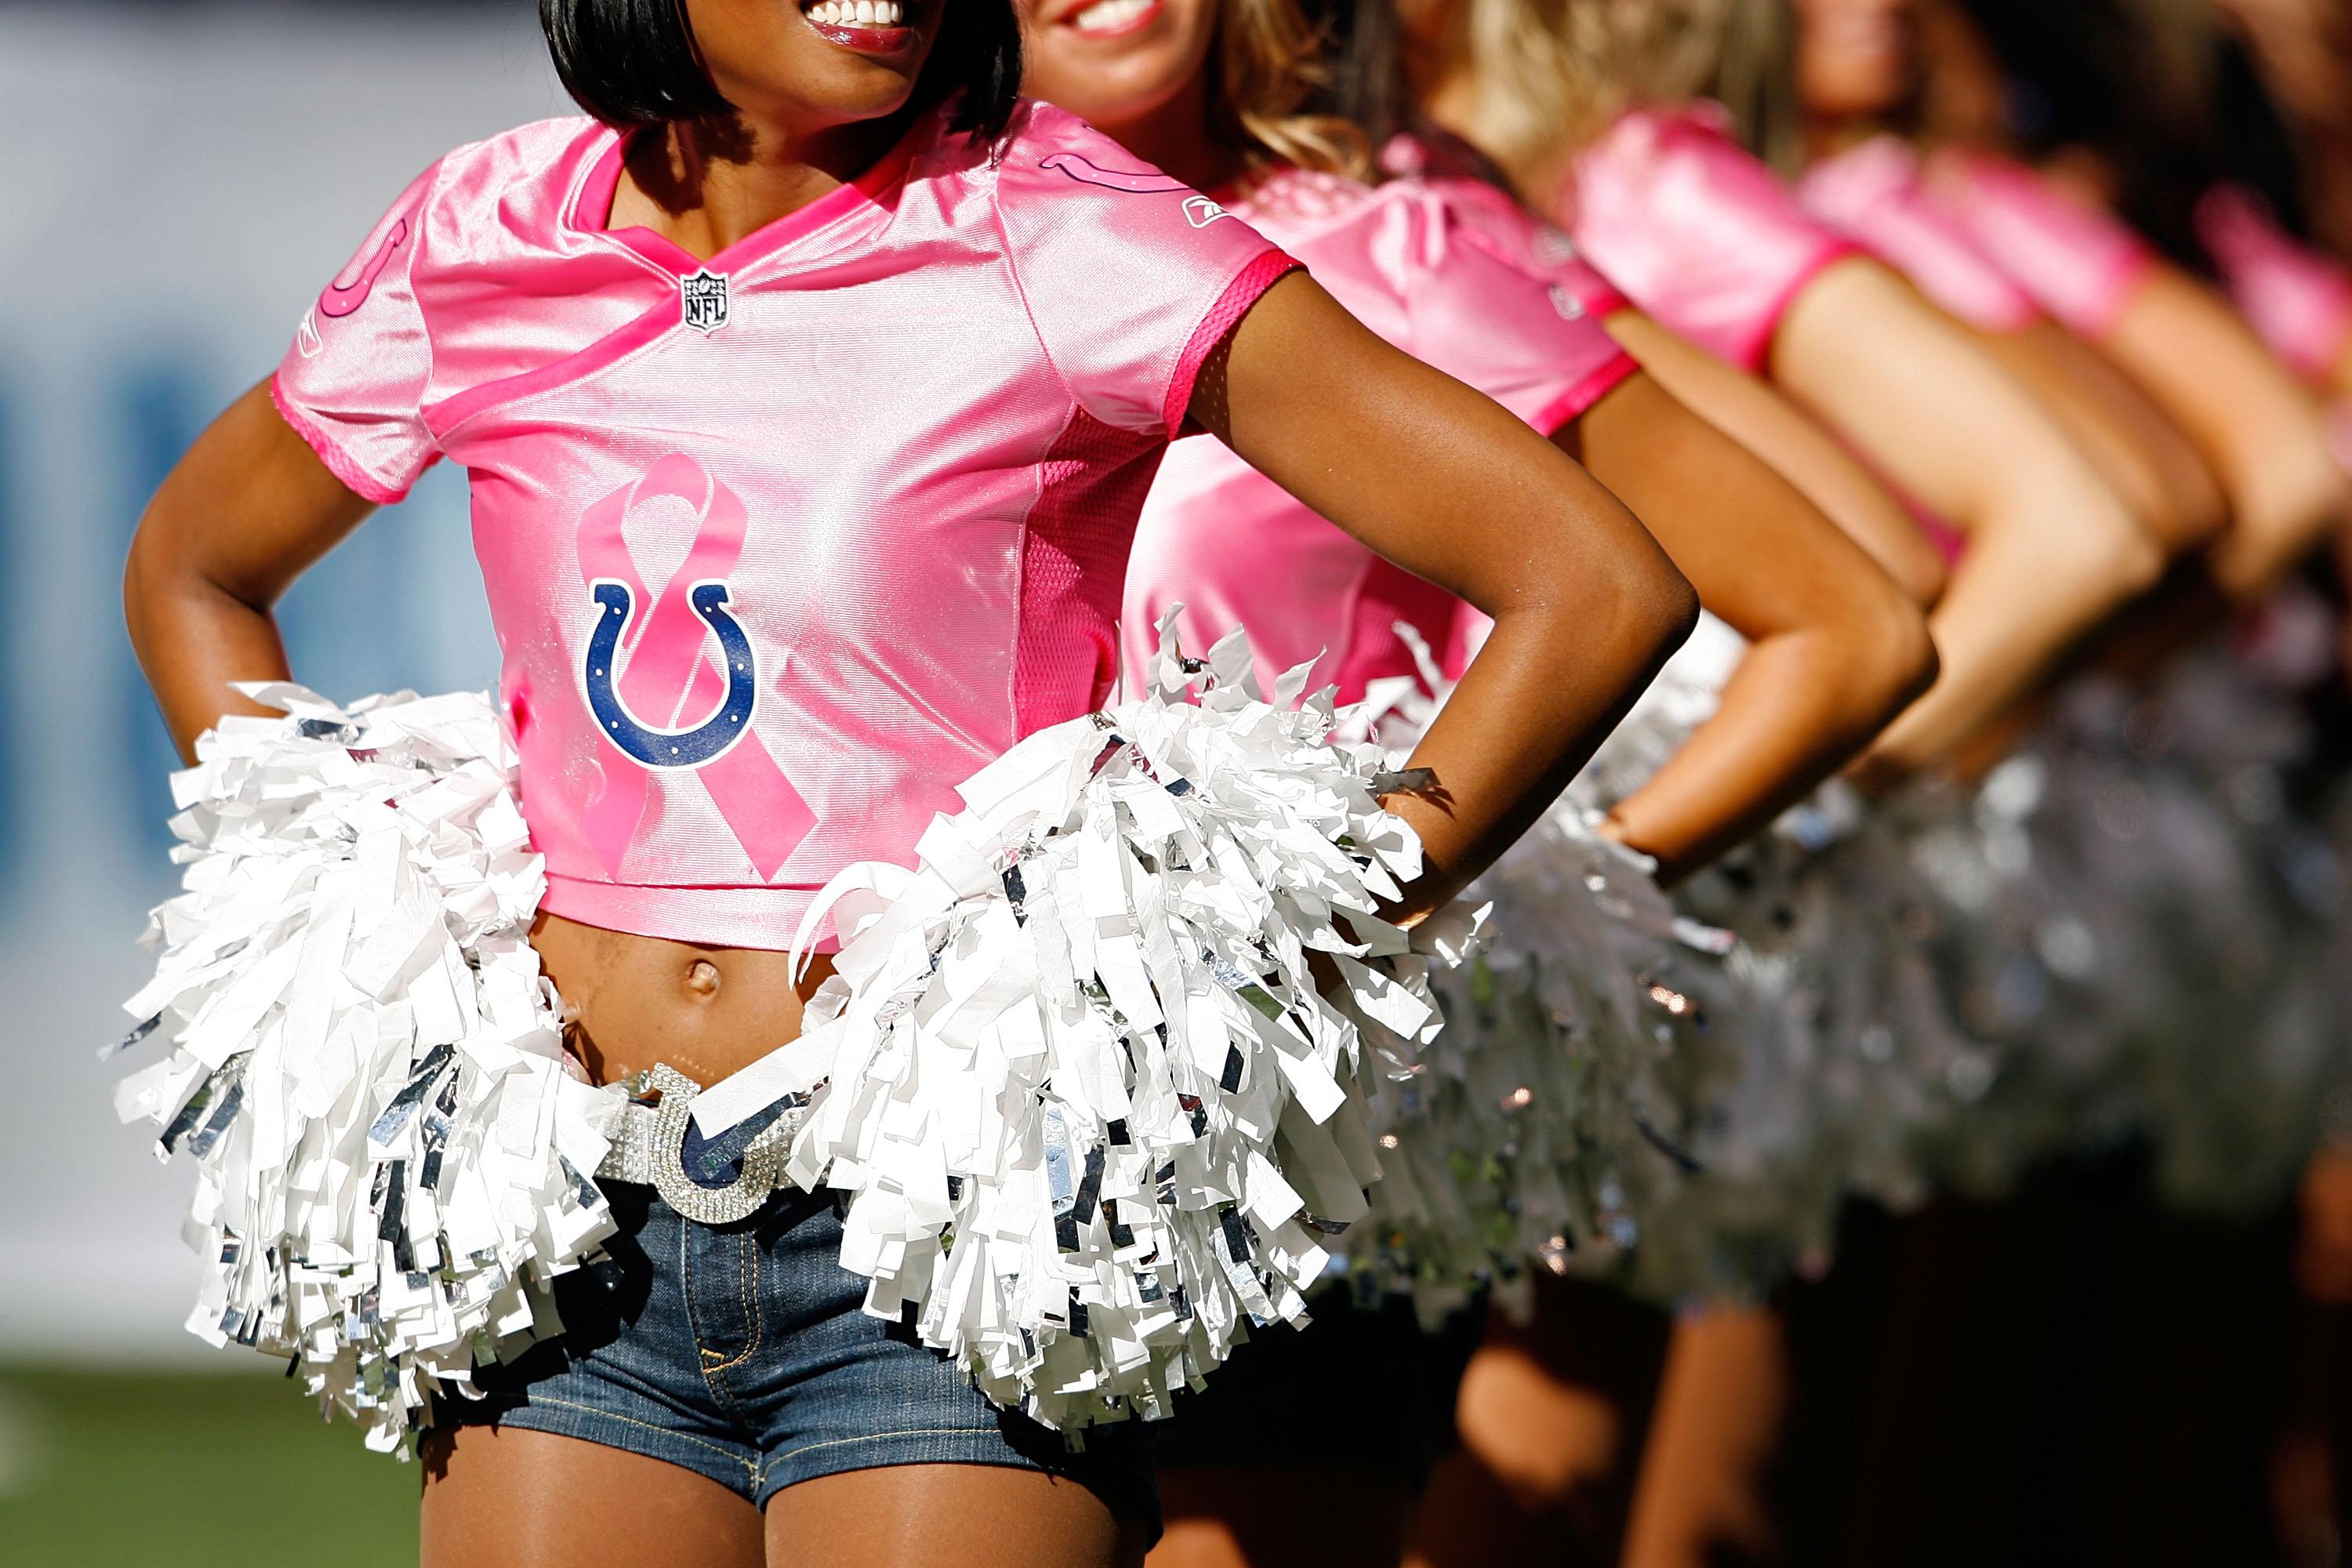 Here's how NFL cheerleader uniforms have evolved over 50 years